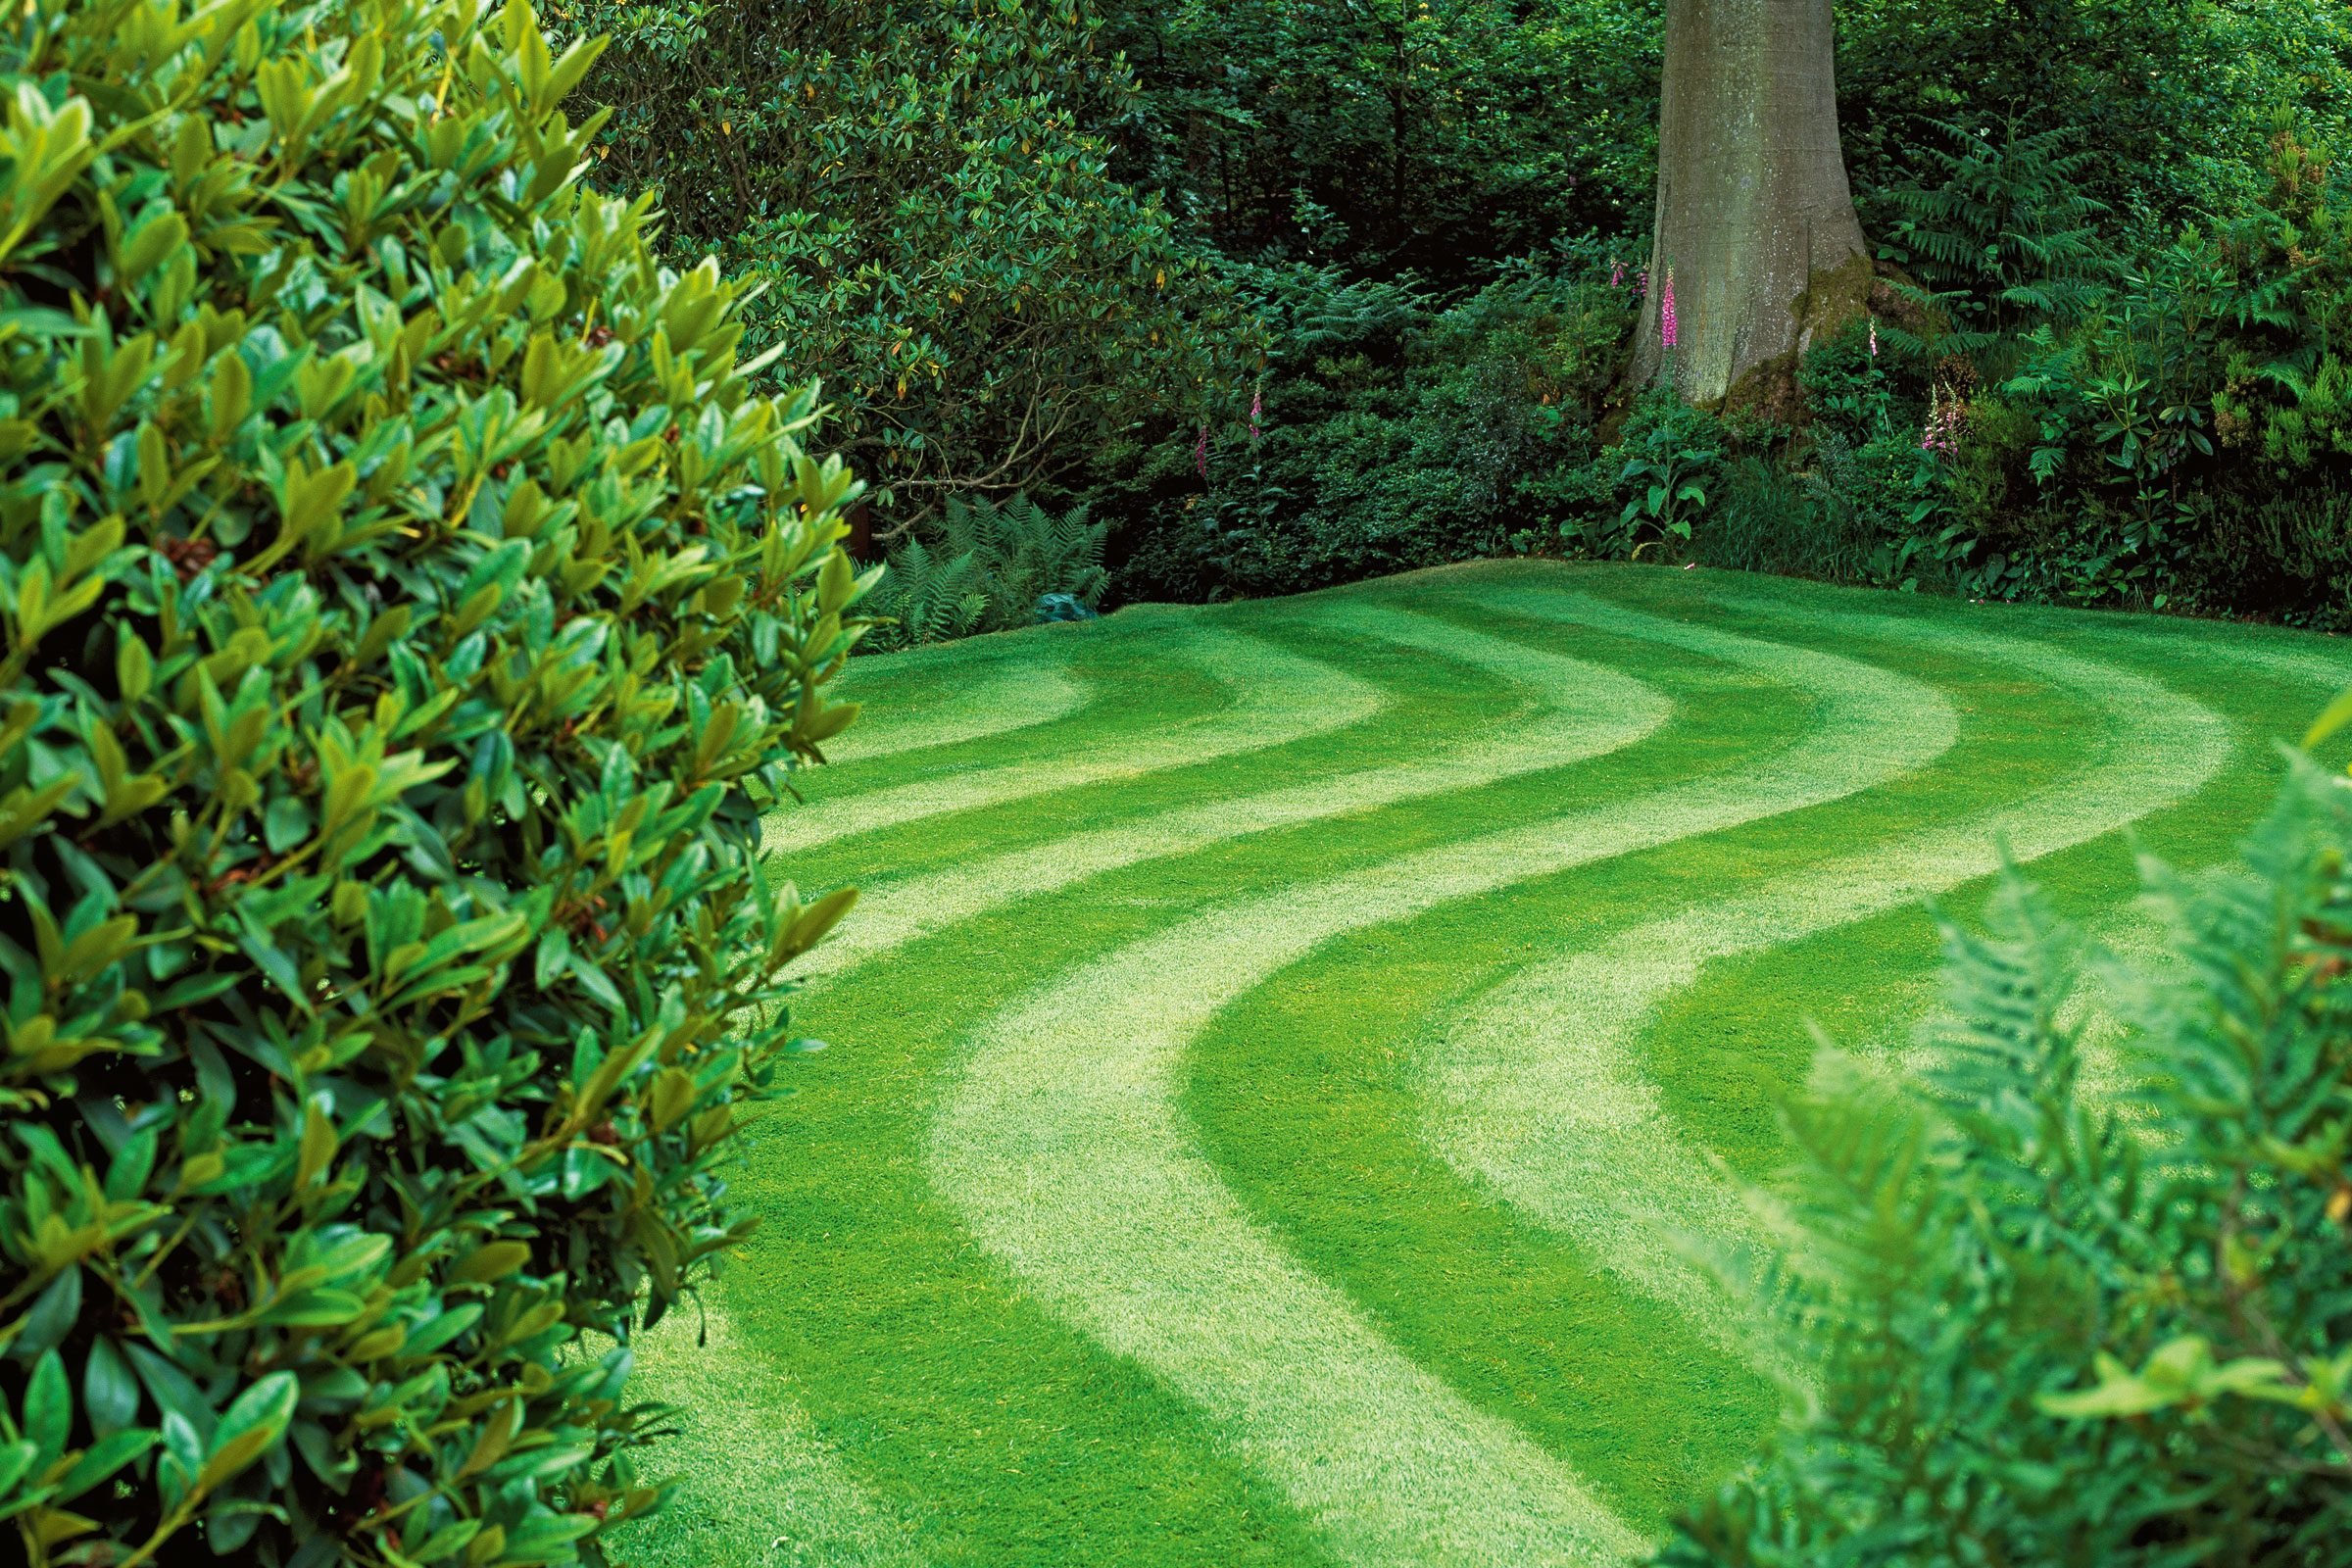 How to Grow Greener Grass